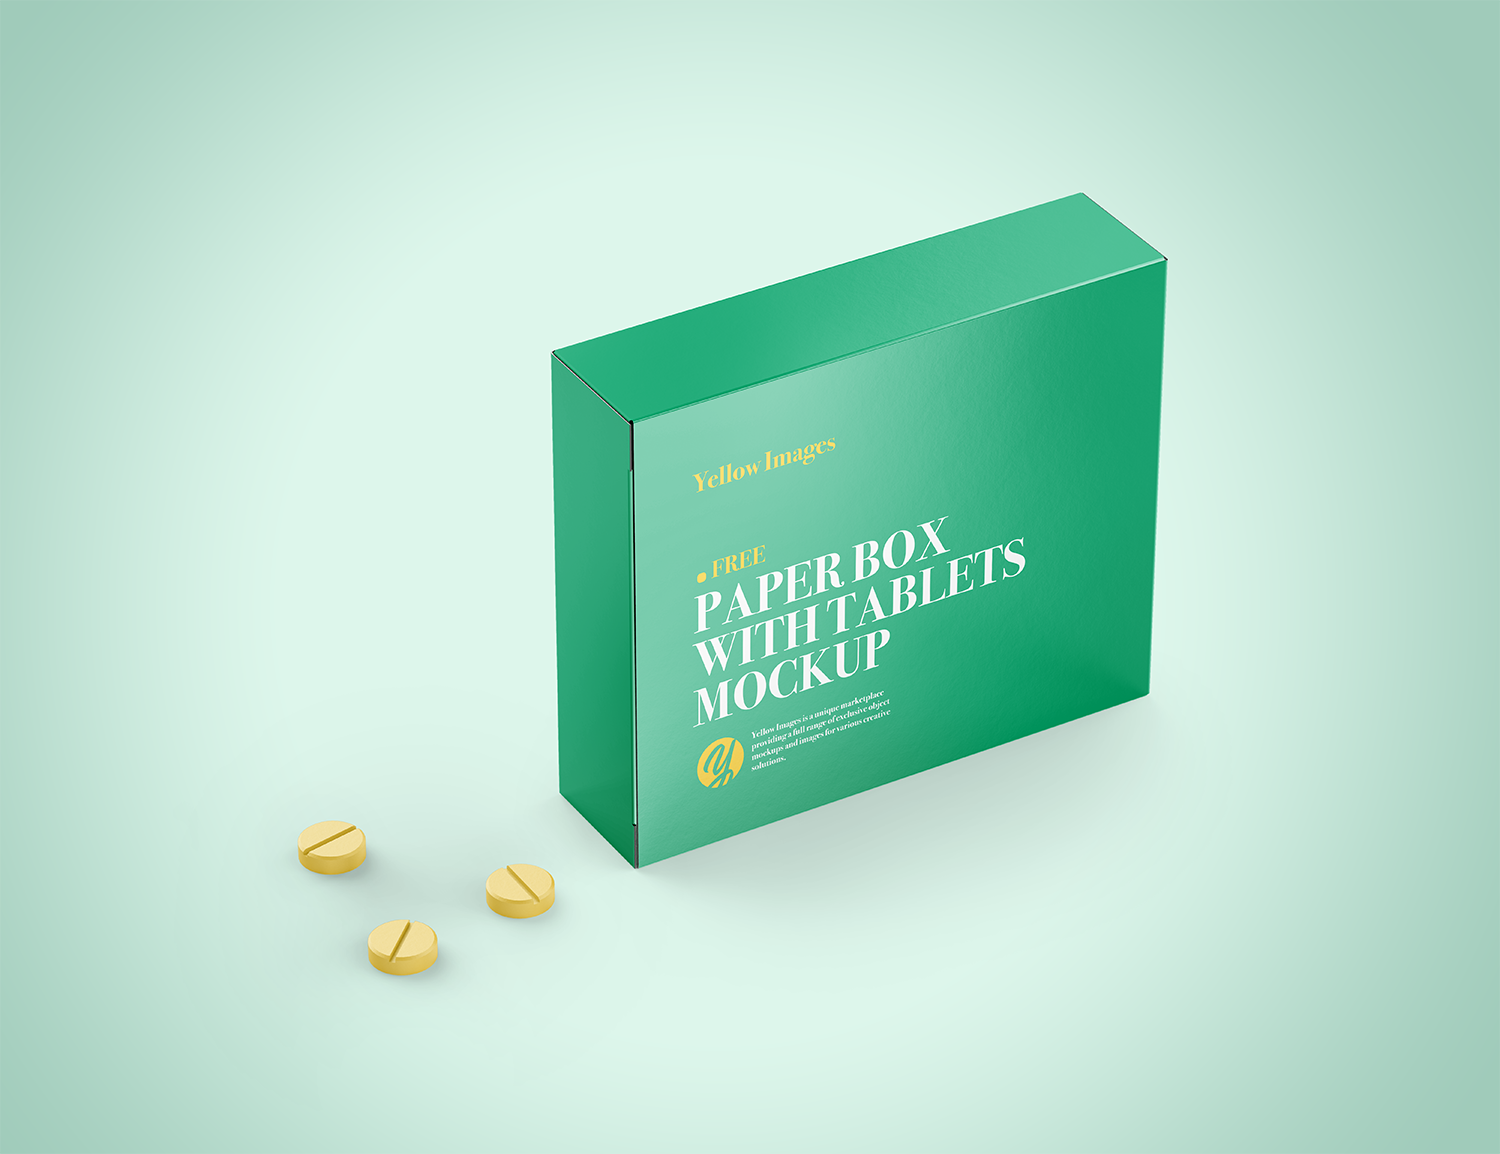 Download Paper Box with Tablets Mockup | Free Mockup